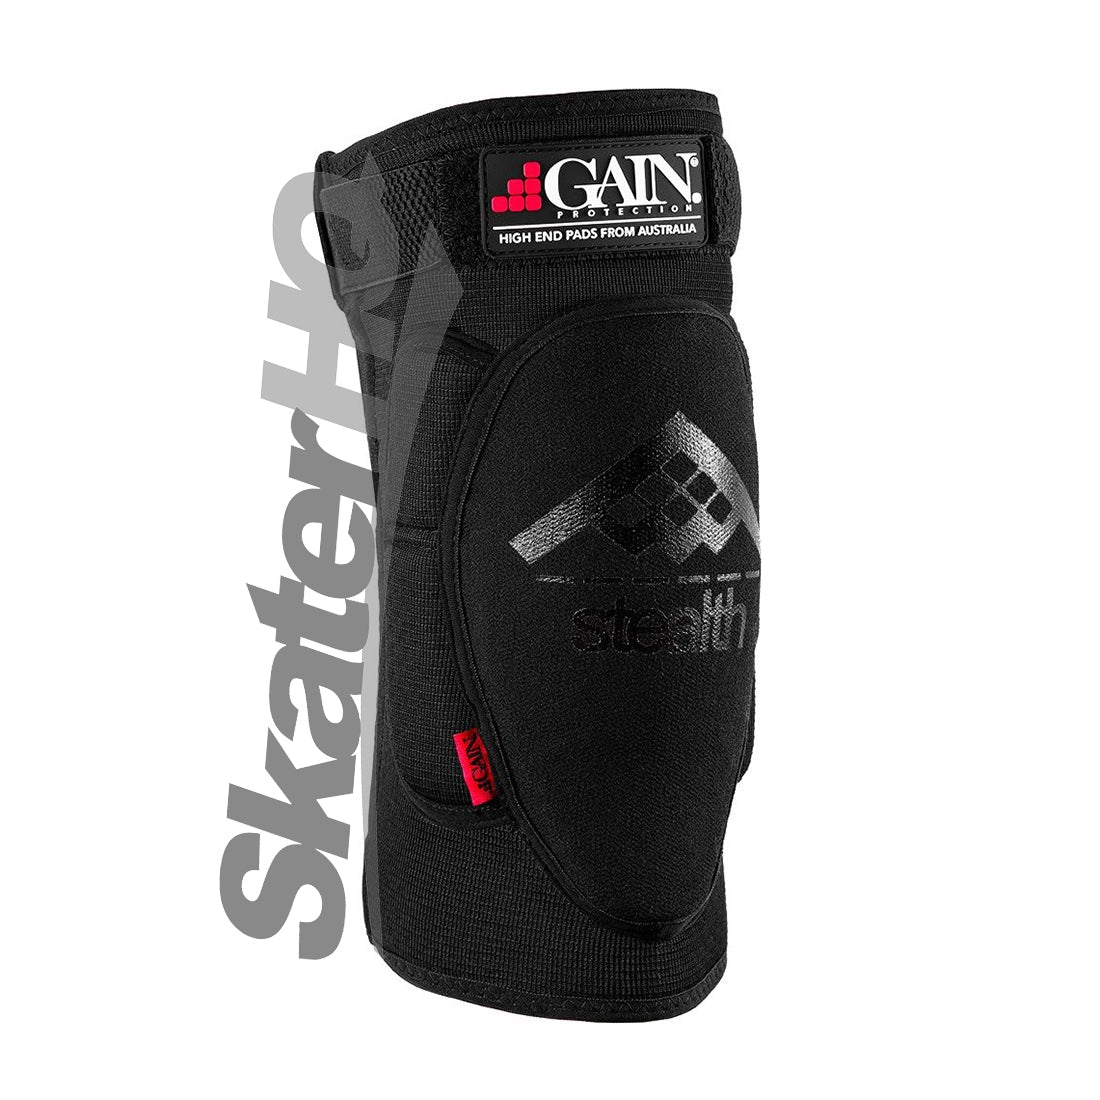 GAIN Stealth Knee Pads - Black - XL Protective Gear